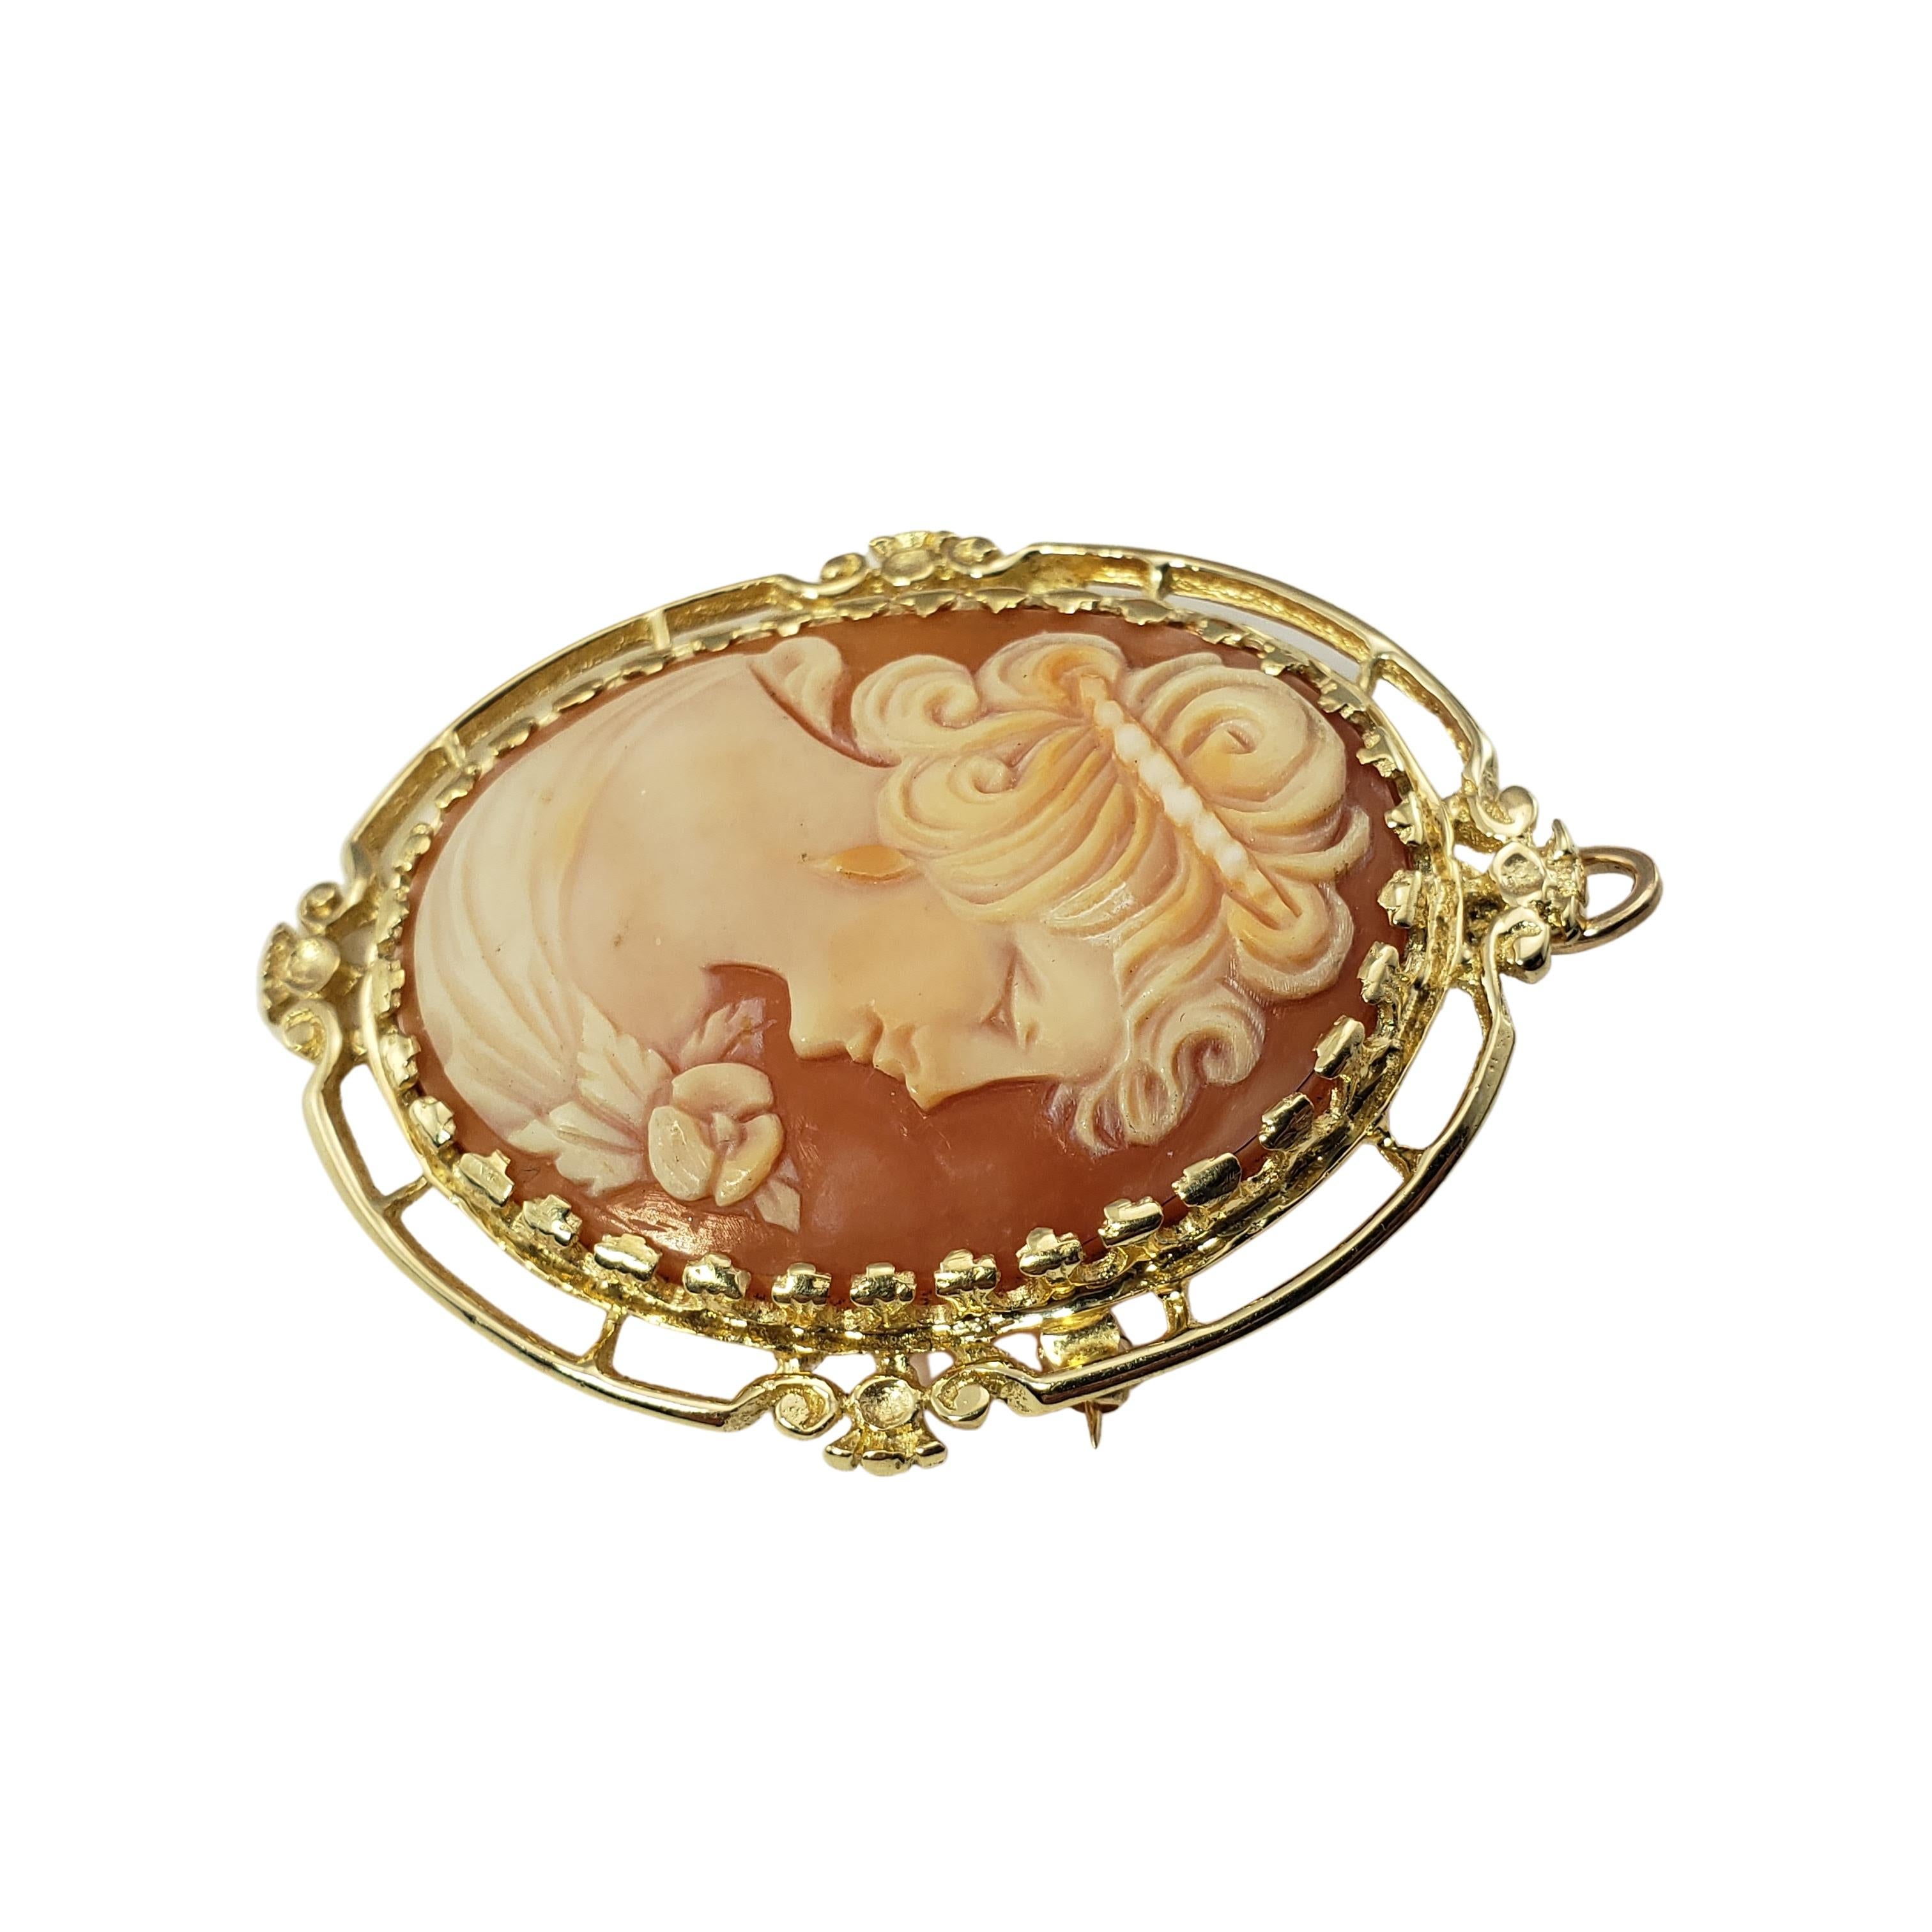 14 Karat Yellow Gold Cameo Brooch/Pendant-

This elegant cameo features a lovely lady in profile set in beautifully detailed 14K yellow gold.  Can be worn as a brooch or a pendant.

Size: 49 mm x 36 mm

Weight:  7.1 dwt. /  11.1 gr.

Stamped: